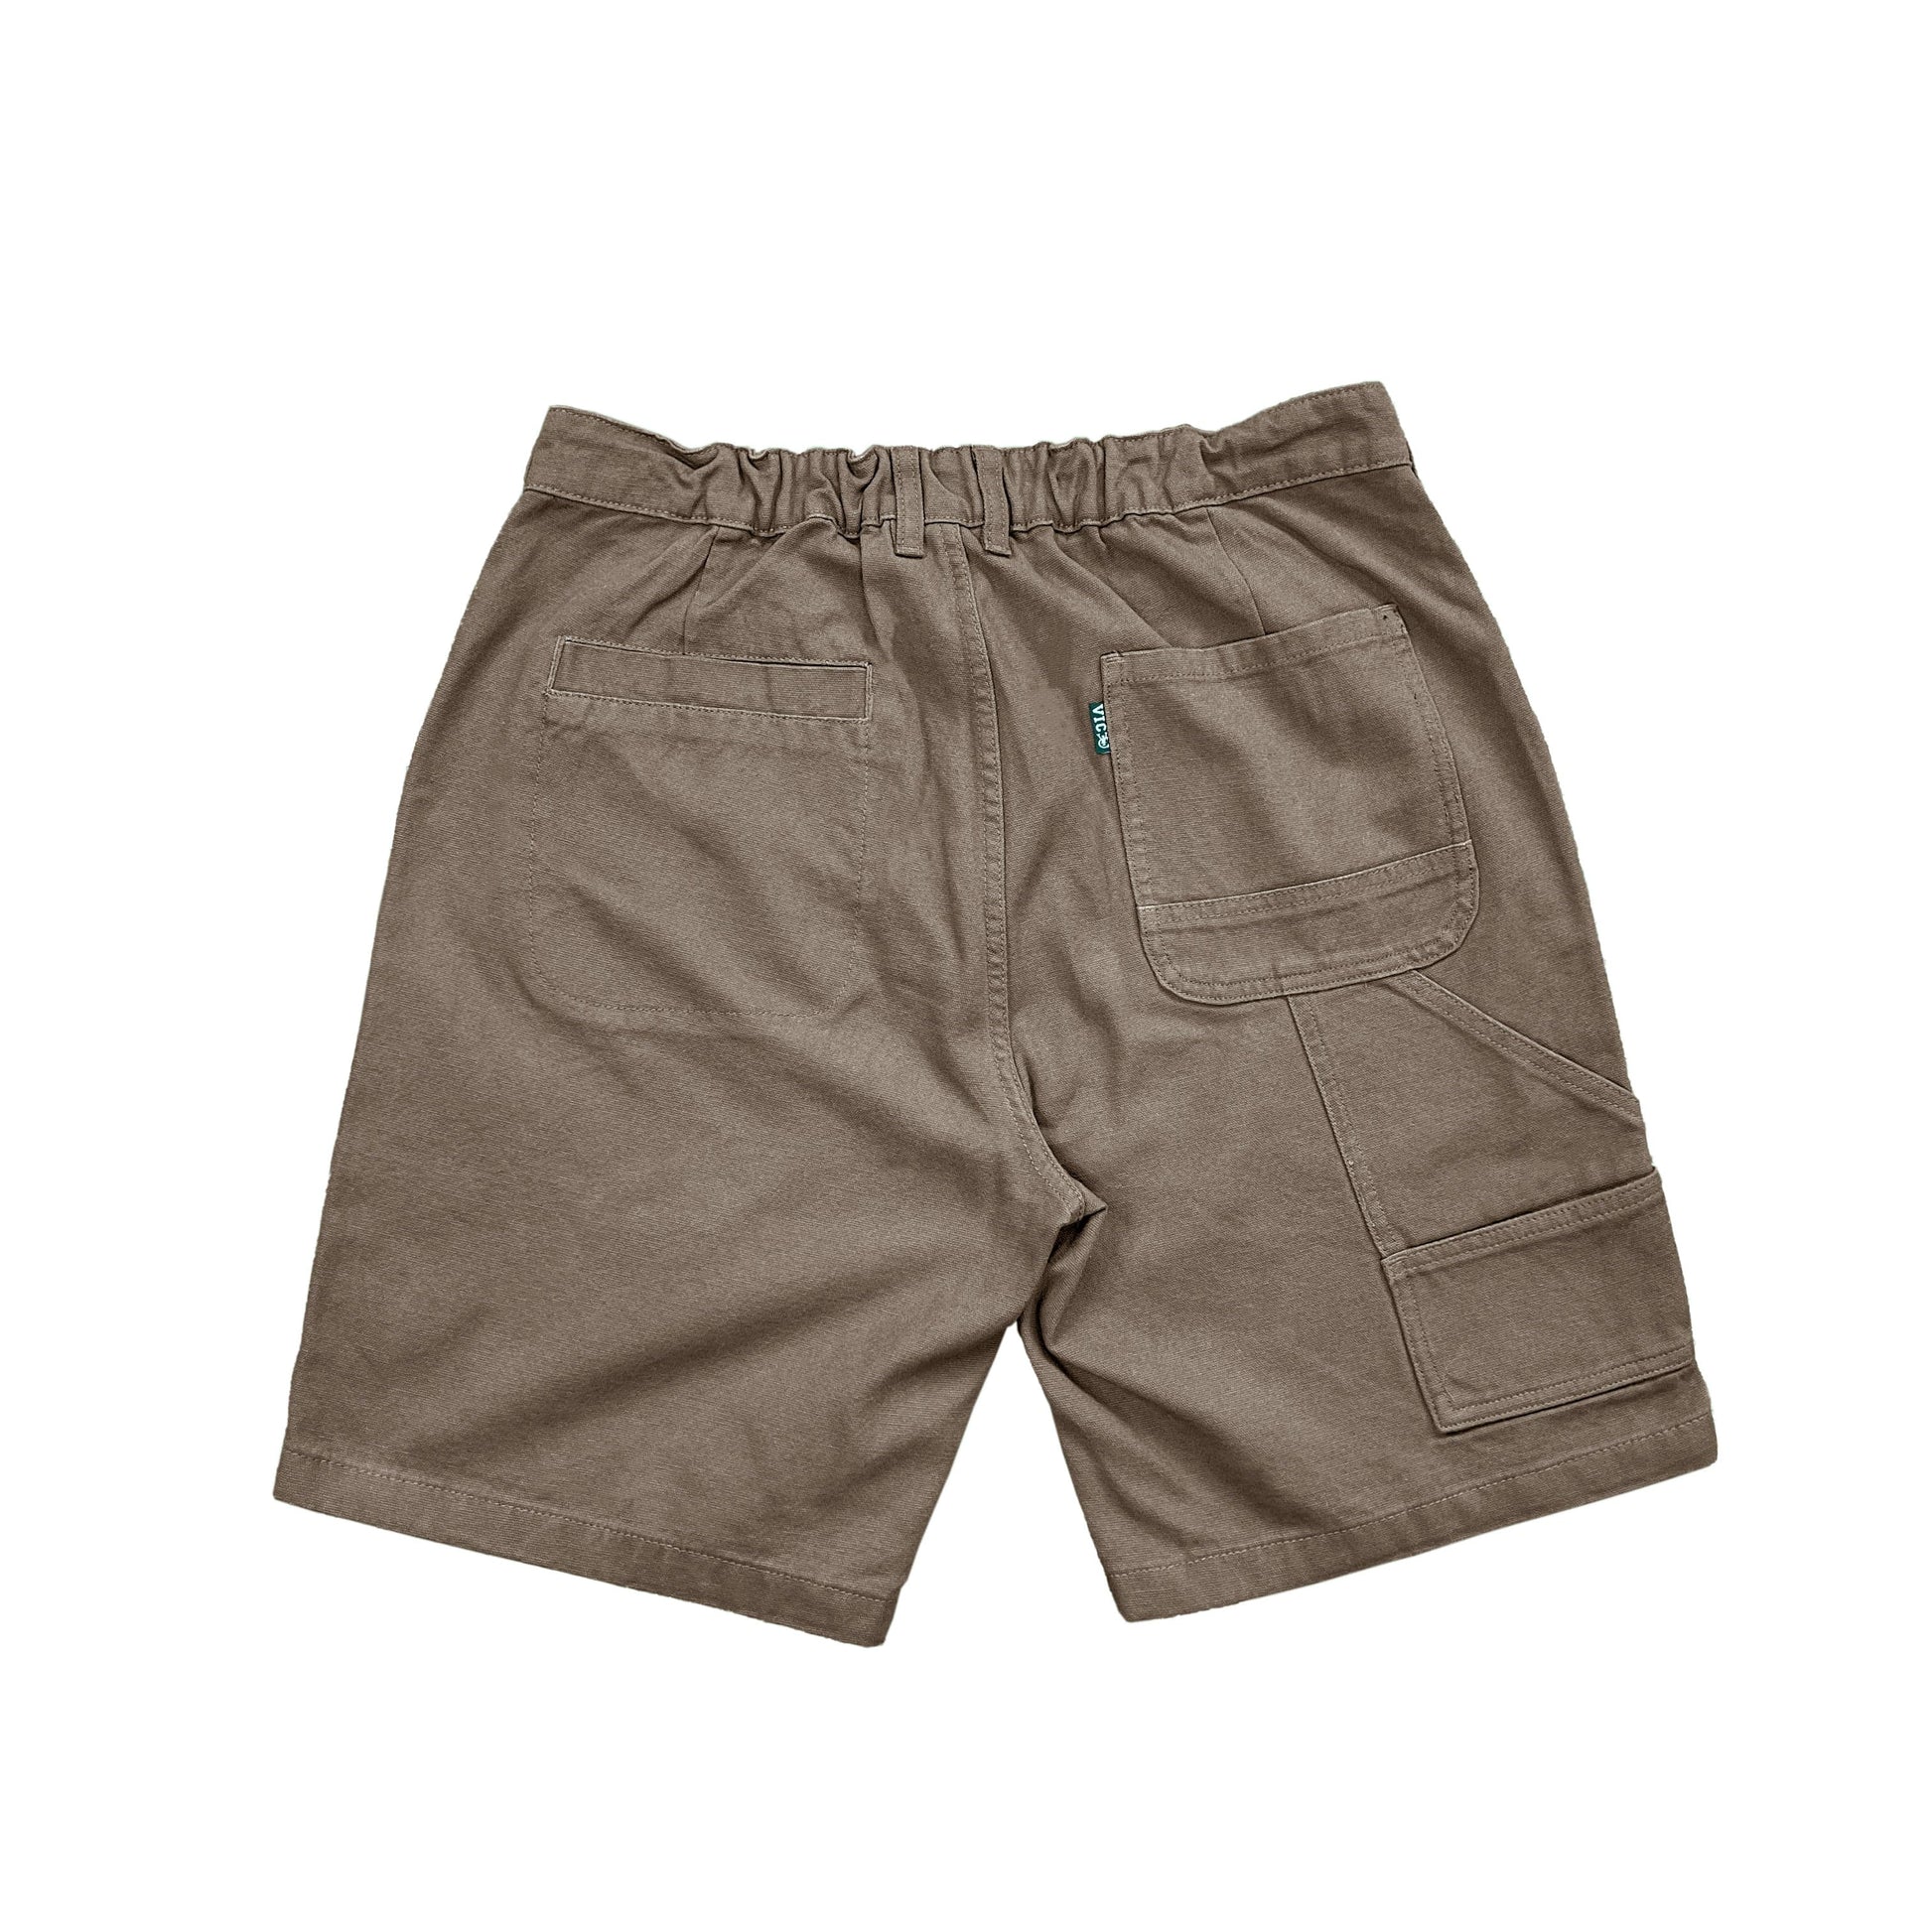 Discover our Canvas Work Shorts: vintage-inspired yet modern. Crafted from heavyweight 365 gsm cotton duck canvas, they offer a 90s retro style in a regular fit. Featuring a YKK zip fly, elastic back waistband, and VIC label flag, they're durable and comfortable. With 2 side pockets, 2 back pockets, and dual back pockets with a coin pocket, they're practical for work or leisure. Order up for a generous fit. Elevate your style with our Canvas Work Shorts!